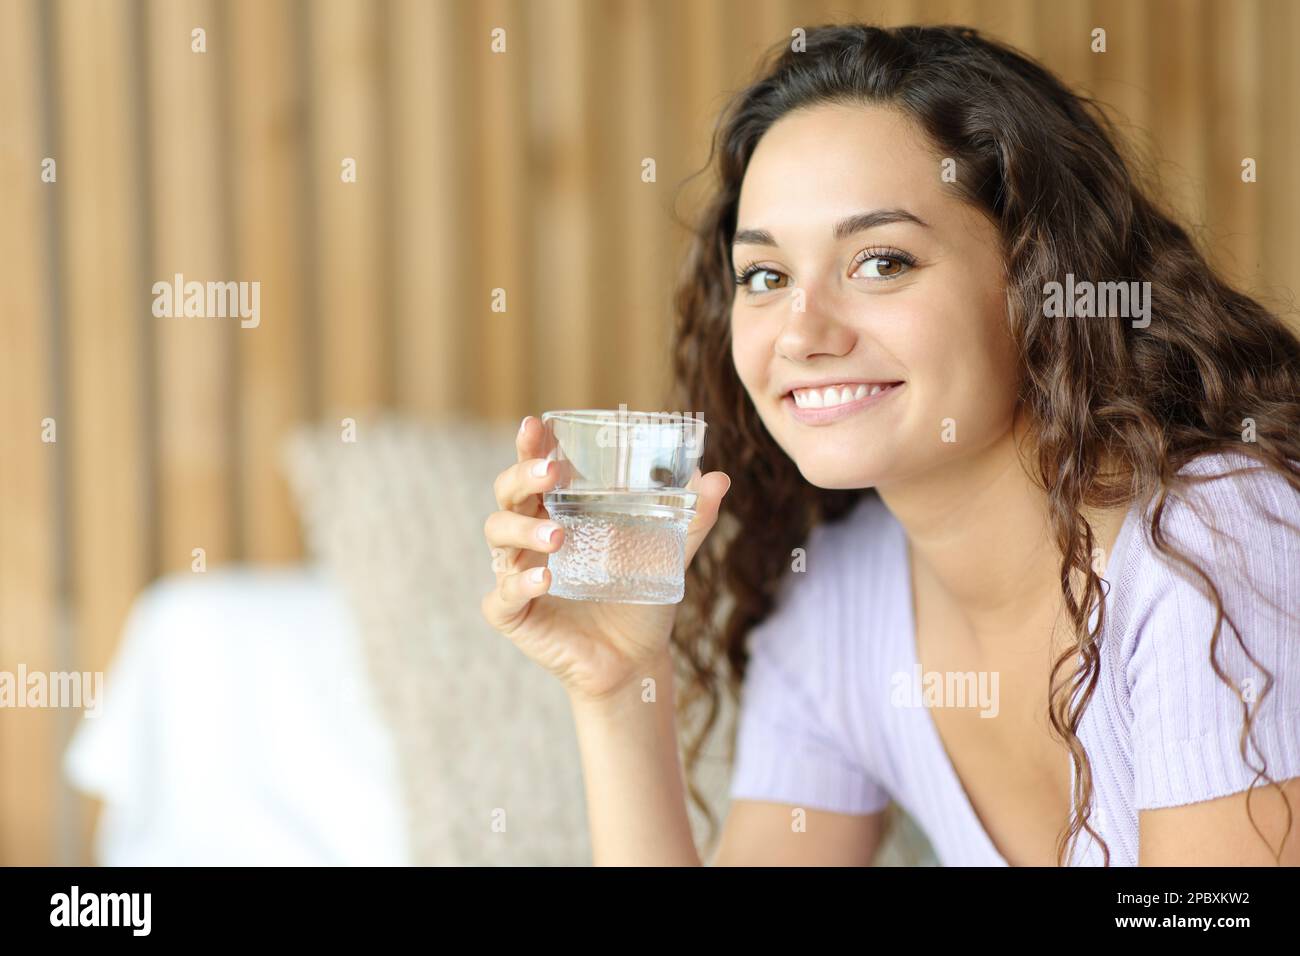 Happy woman holding water glass looks at you sitting on a bed Stock Photo